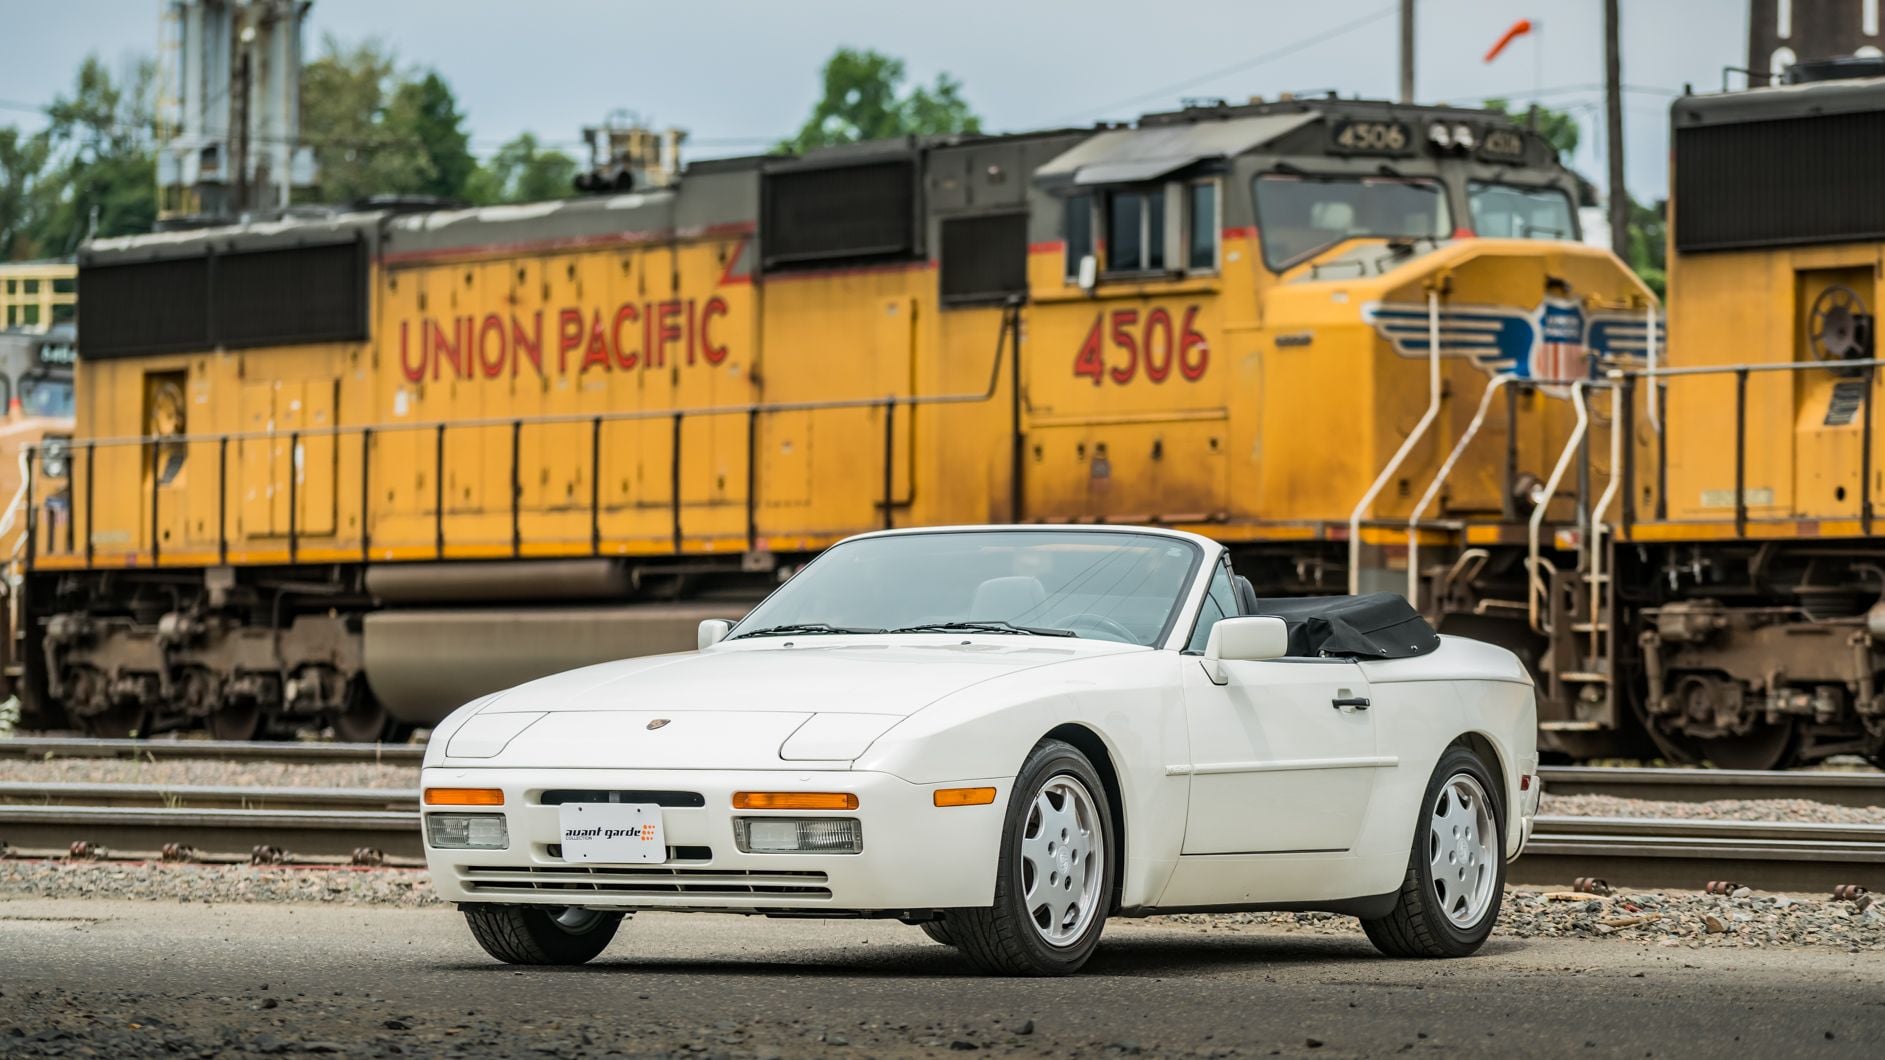 1990 Porsche 944 - 1990 Porsche 944 S2 Cabriolet 5-Speed - Used - VIN WP0CB2946LN480190 - 78,800 Miles - 4 cyl - 2WD - Manual - Convertible - White - Portland, OR 97227, United States